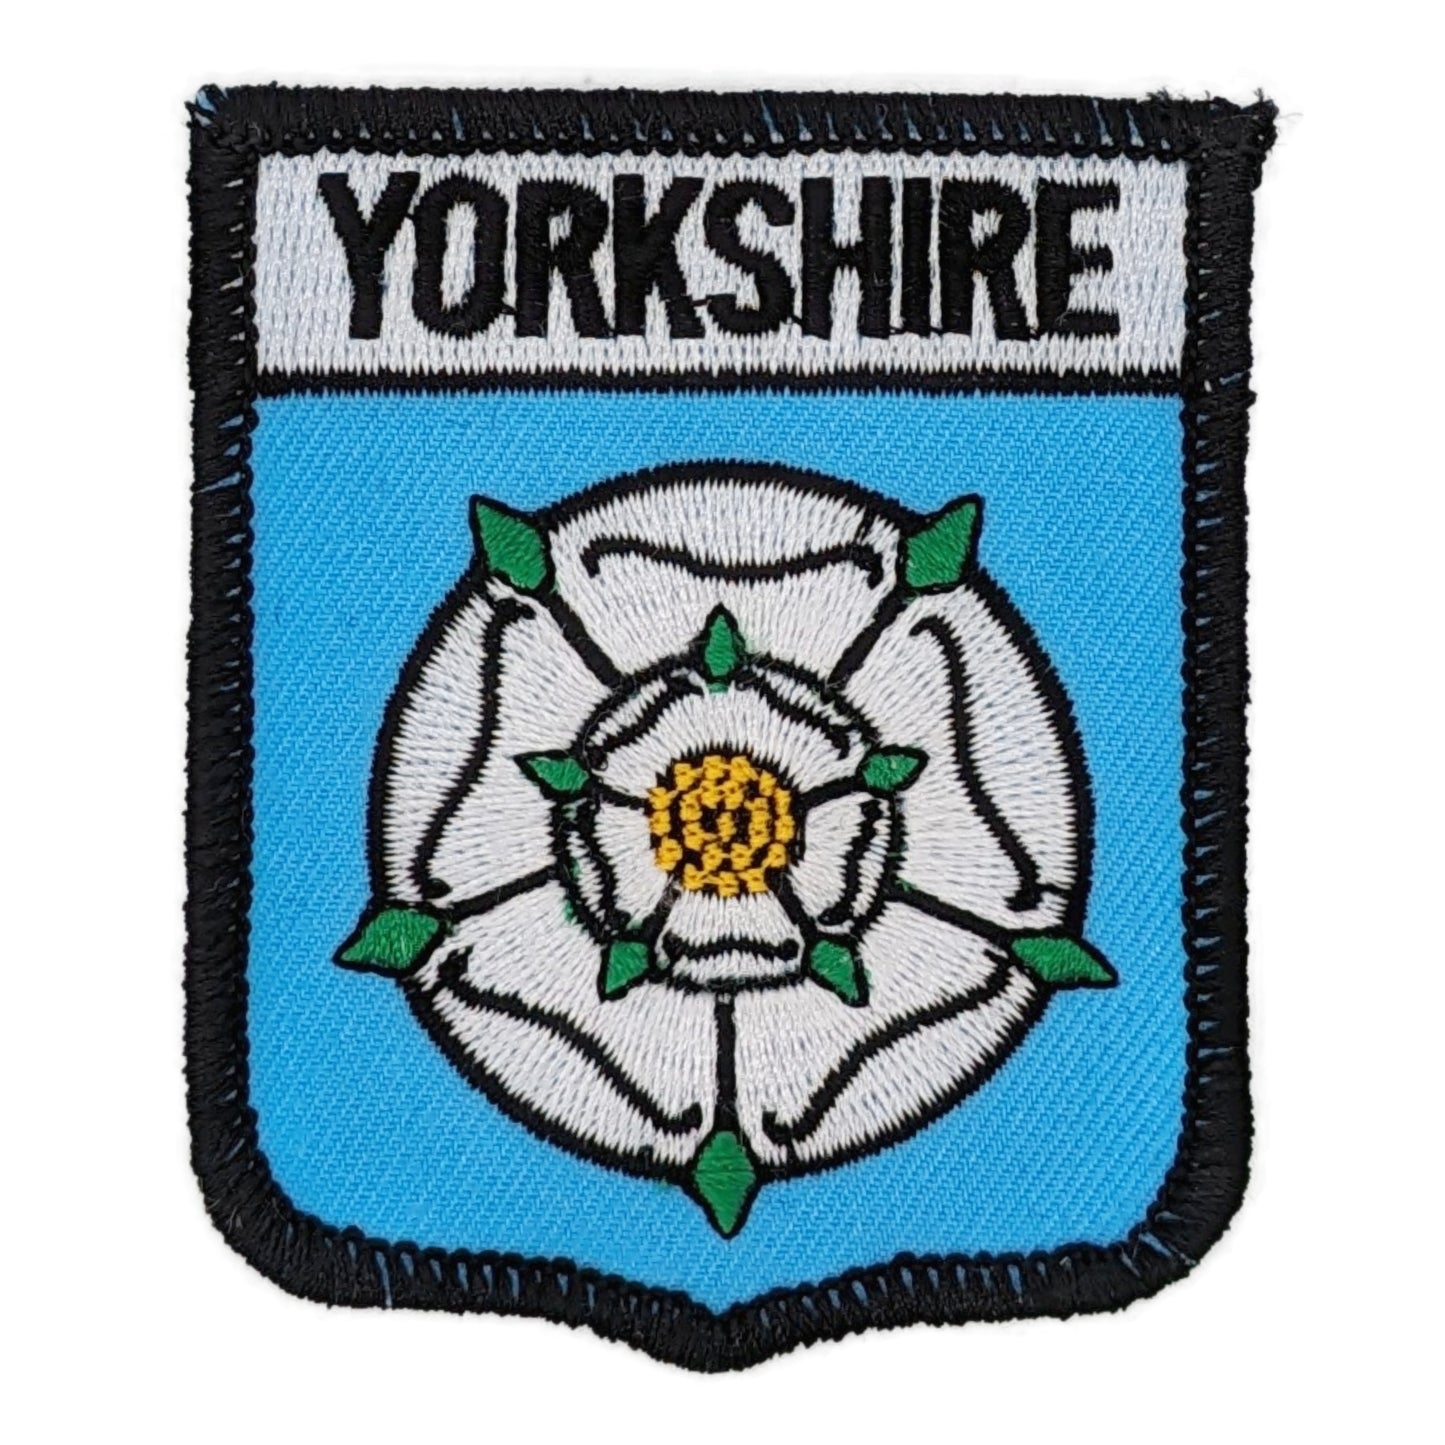 Yorkshire Embroidered Shield Patch Badge - The Great Yorkshire Shop